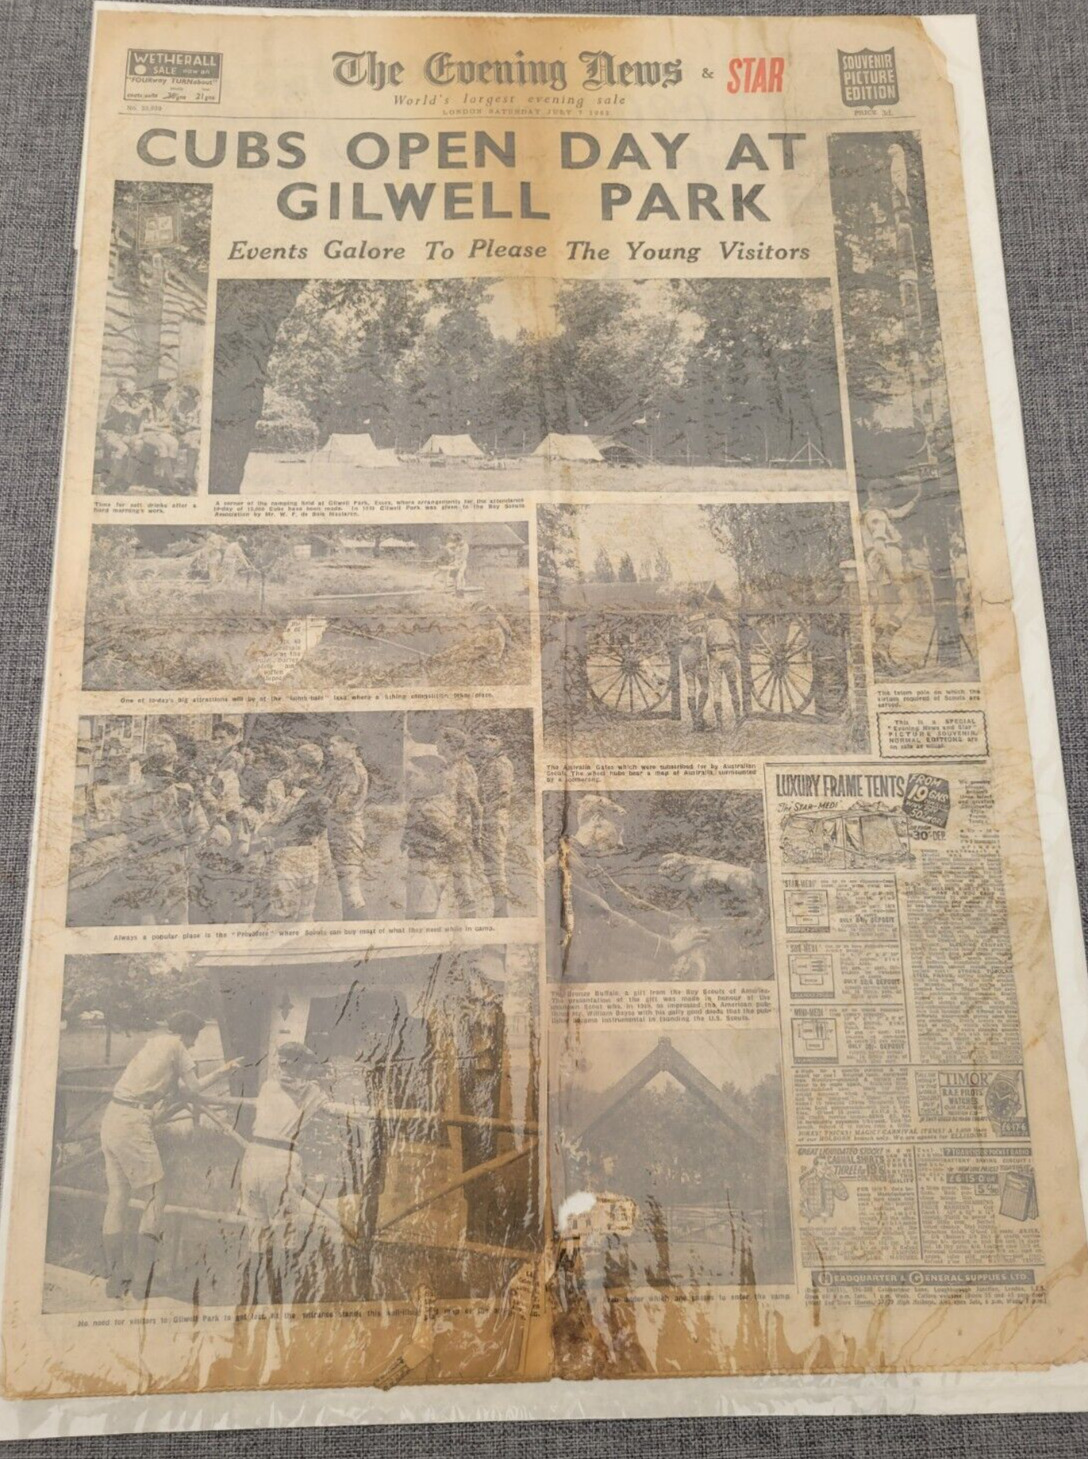 THE EVENING NEWS CUBS OPEN DAY GILWELL PARK7TH JULY 1962 NEWSPAPER